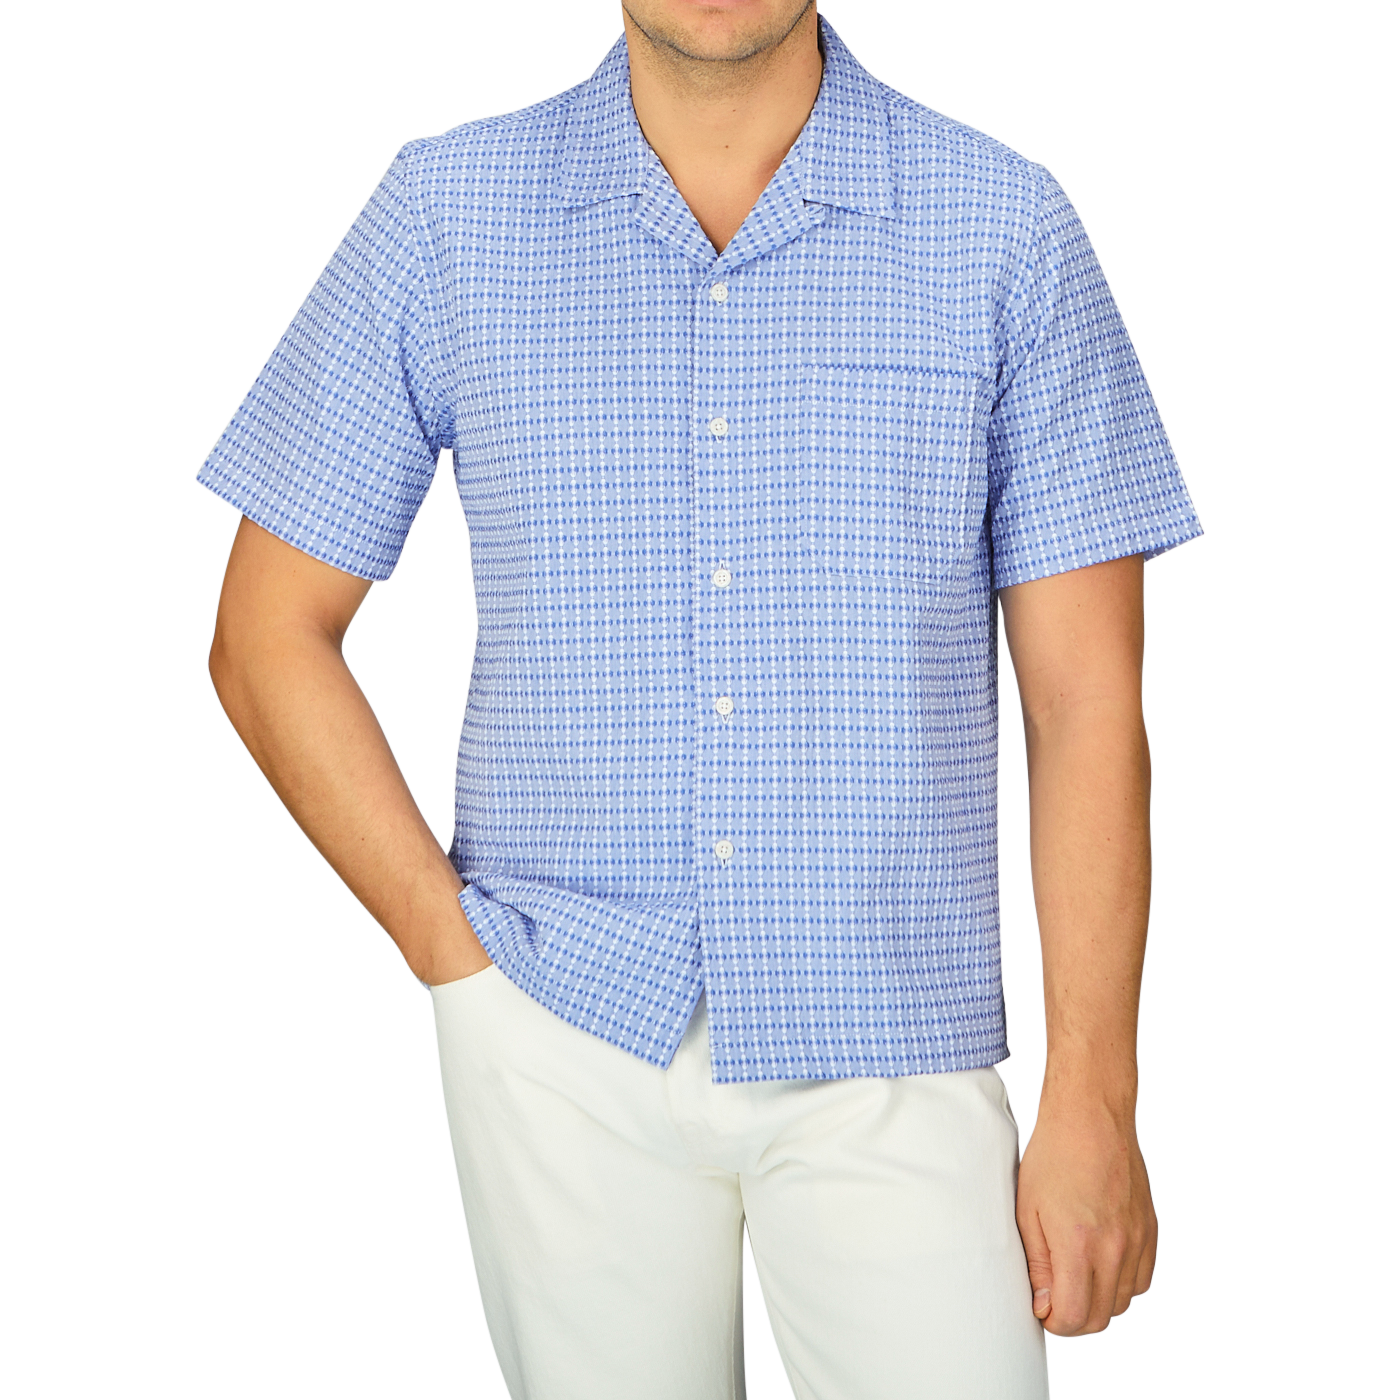 Men's Light Blue Cotton Camp Collar Road Shirt by Universal Works.